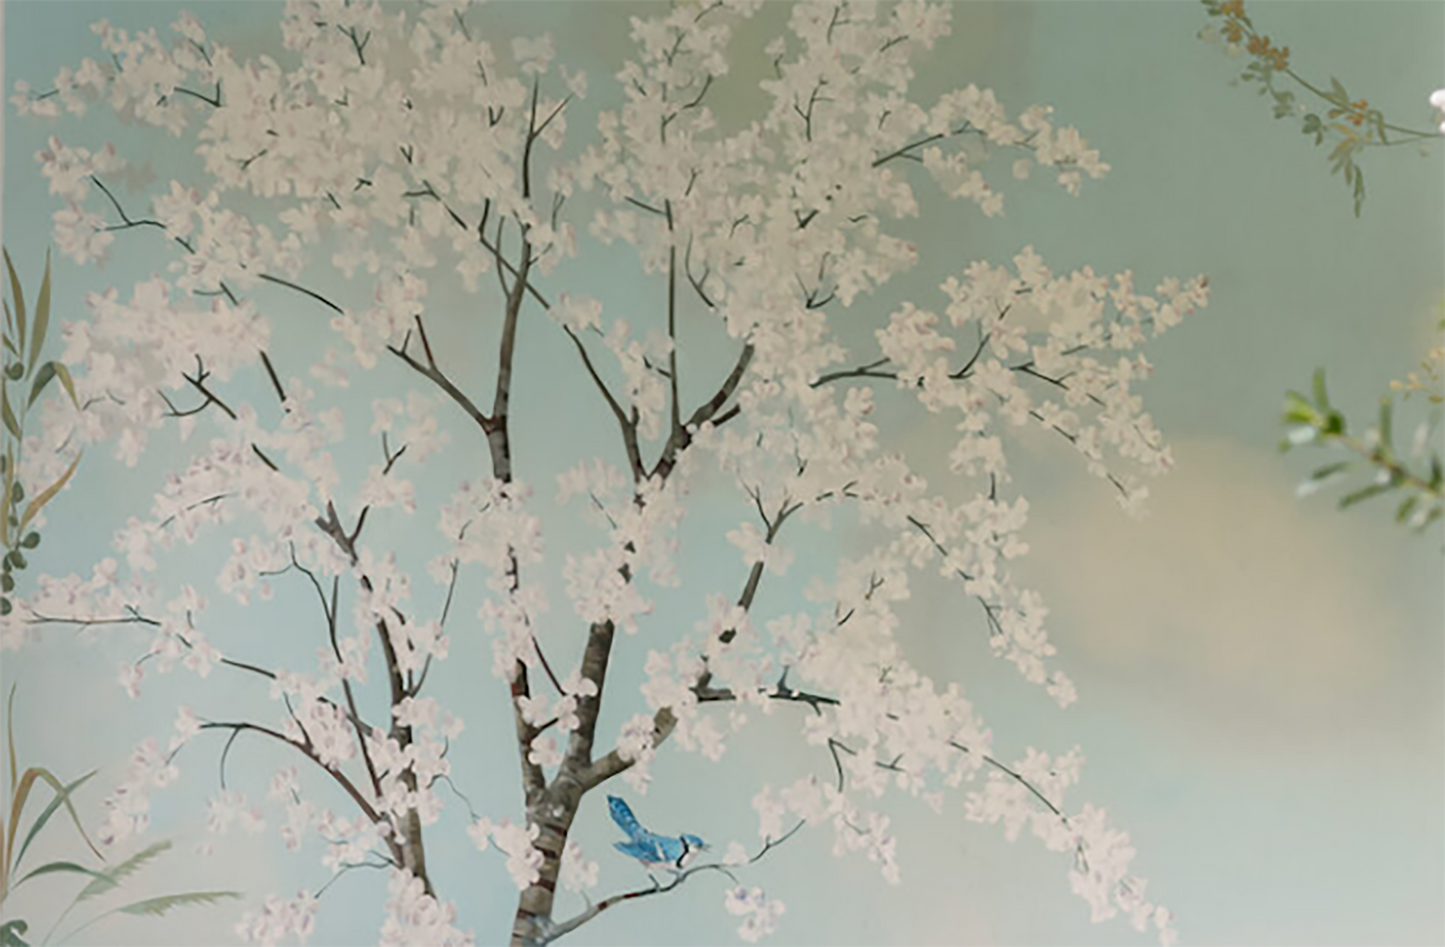 Cherry blossom with blue jay II